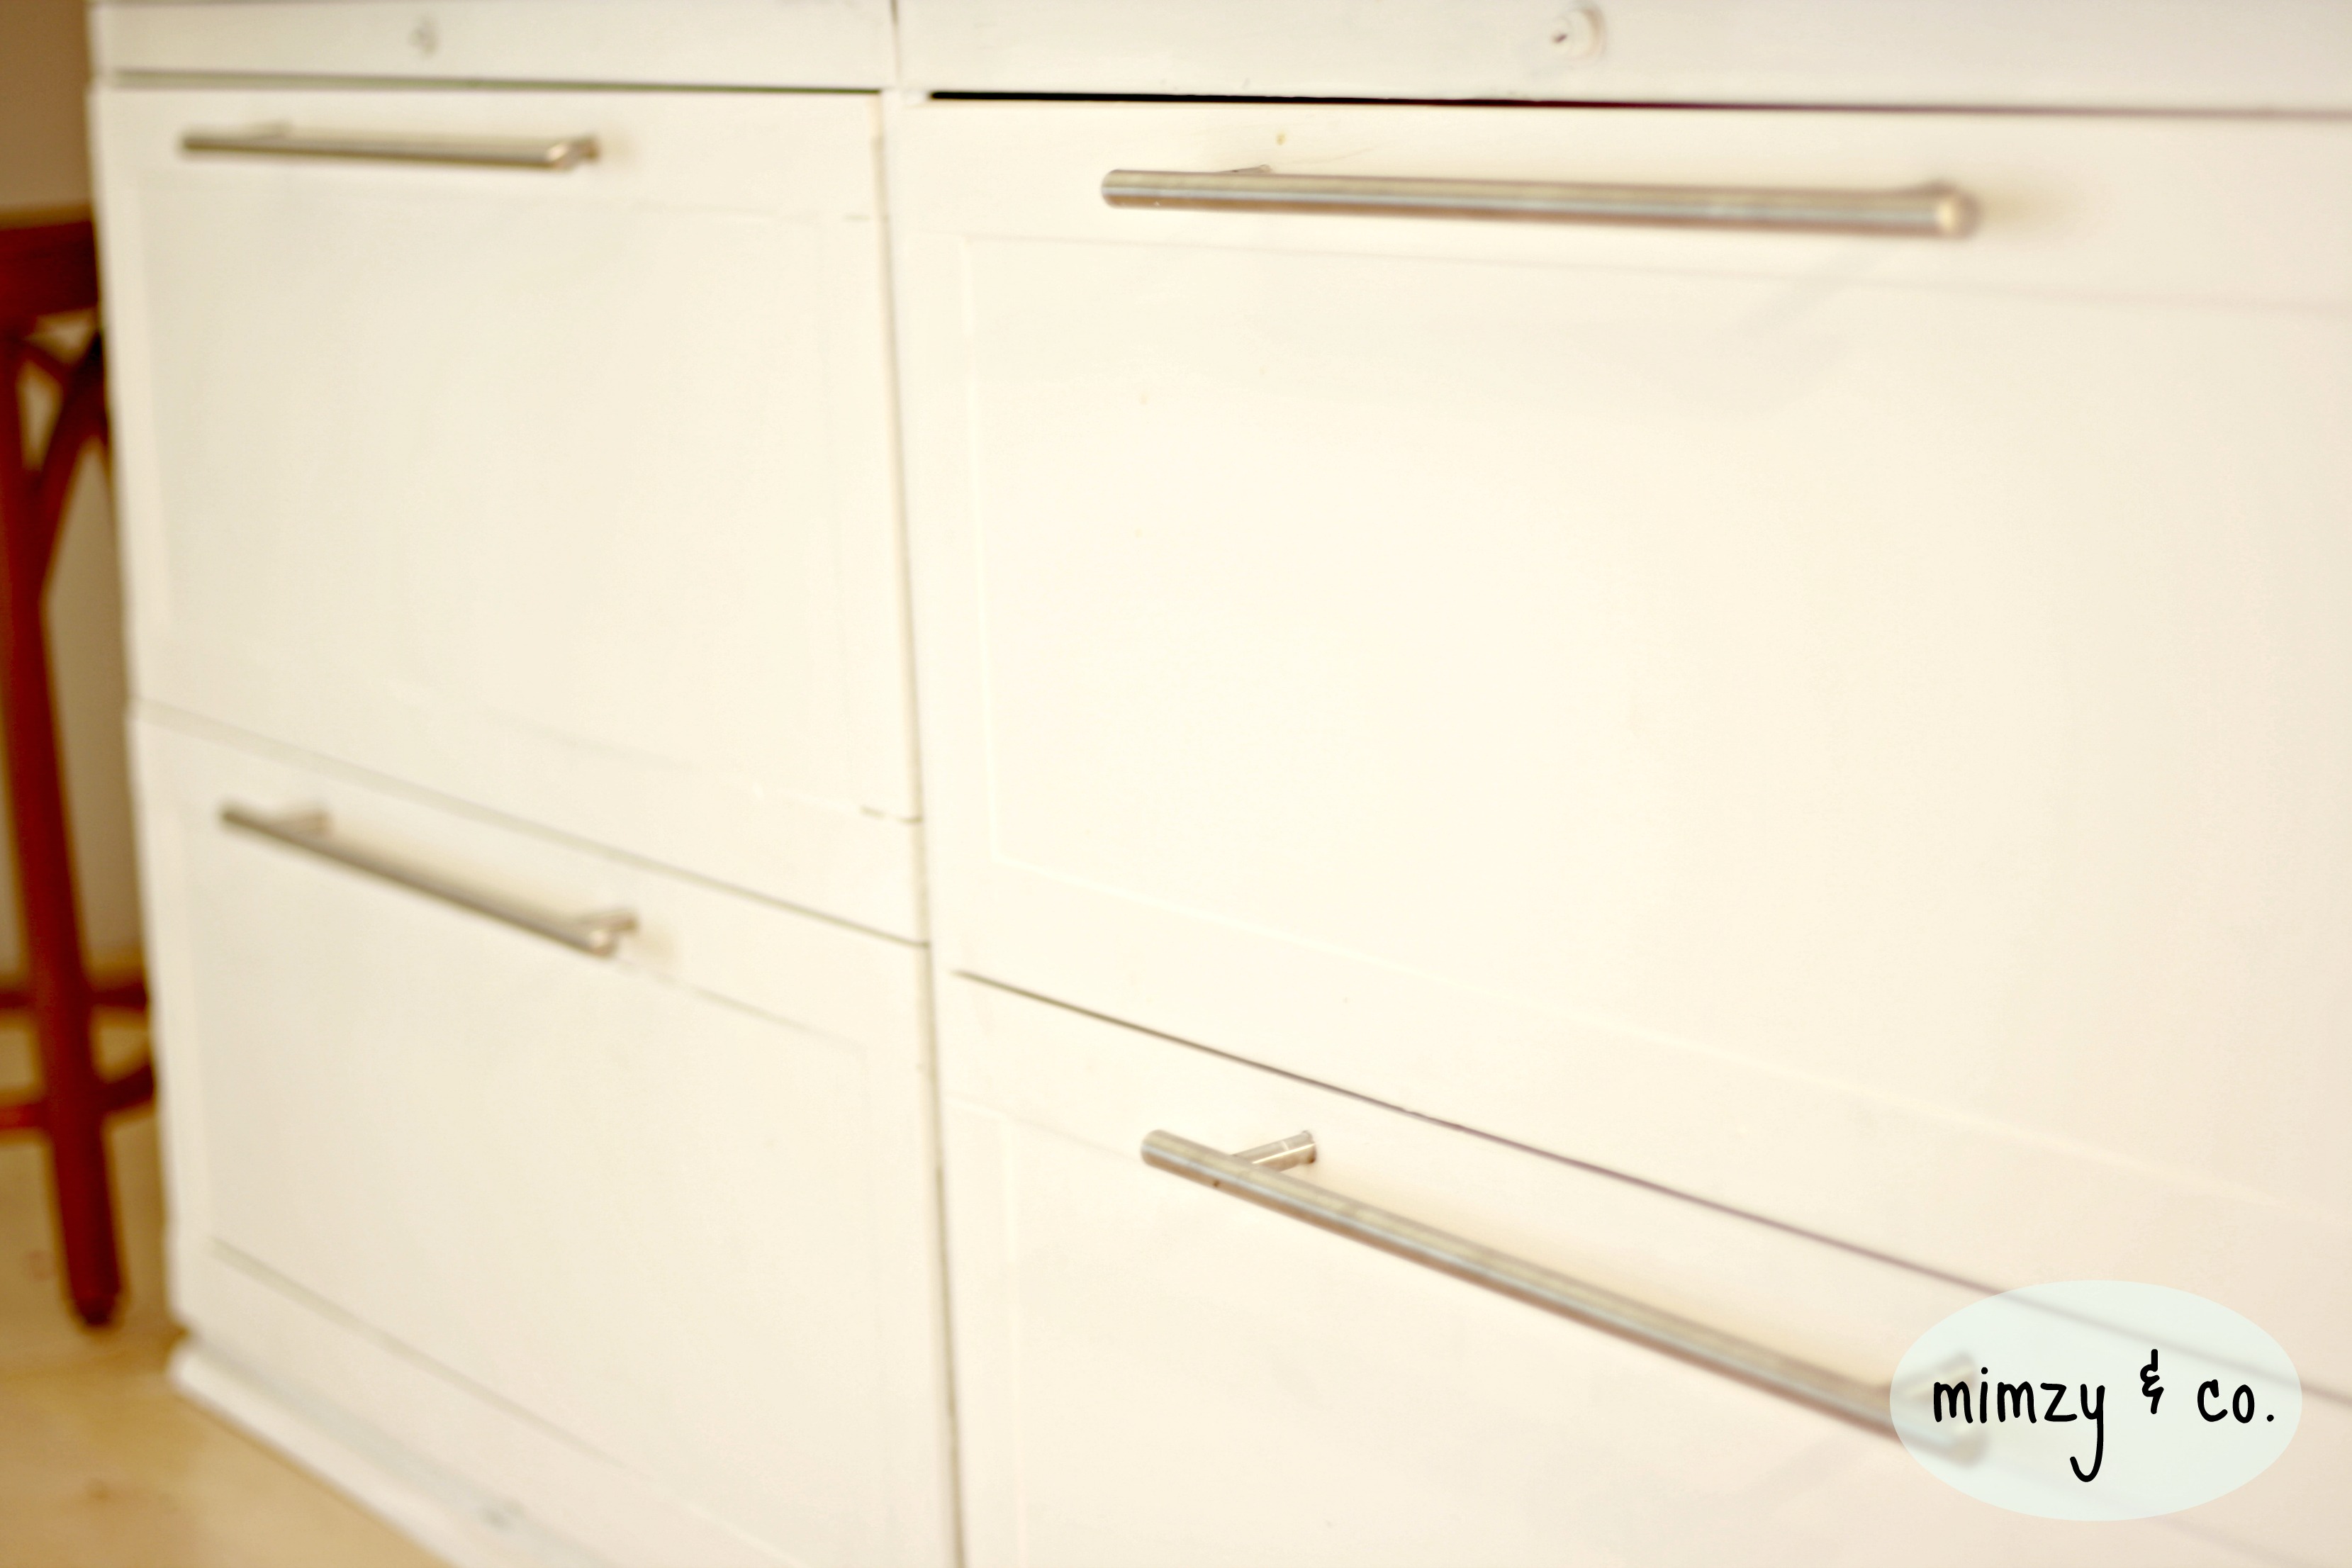 How To Turn File Cabinets Into Kitchen Cabinets Mimzy Company